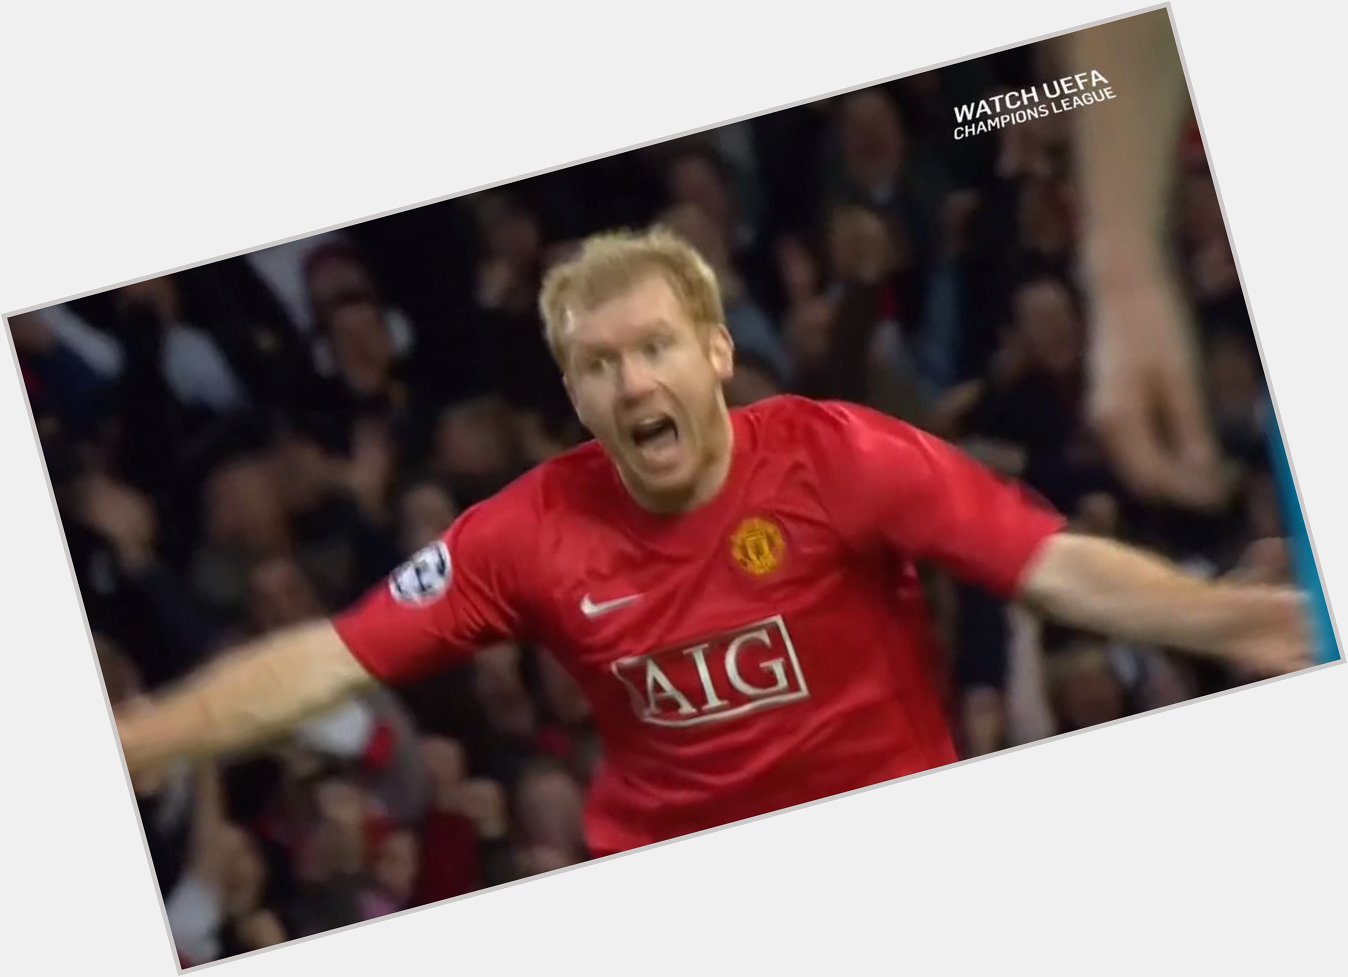  - Happy Birthday, Paul Scholes. Here\s you taking to the final of the Champo League, you lovely man.

